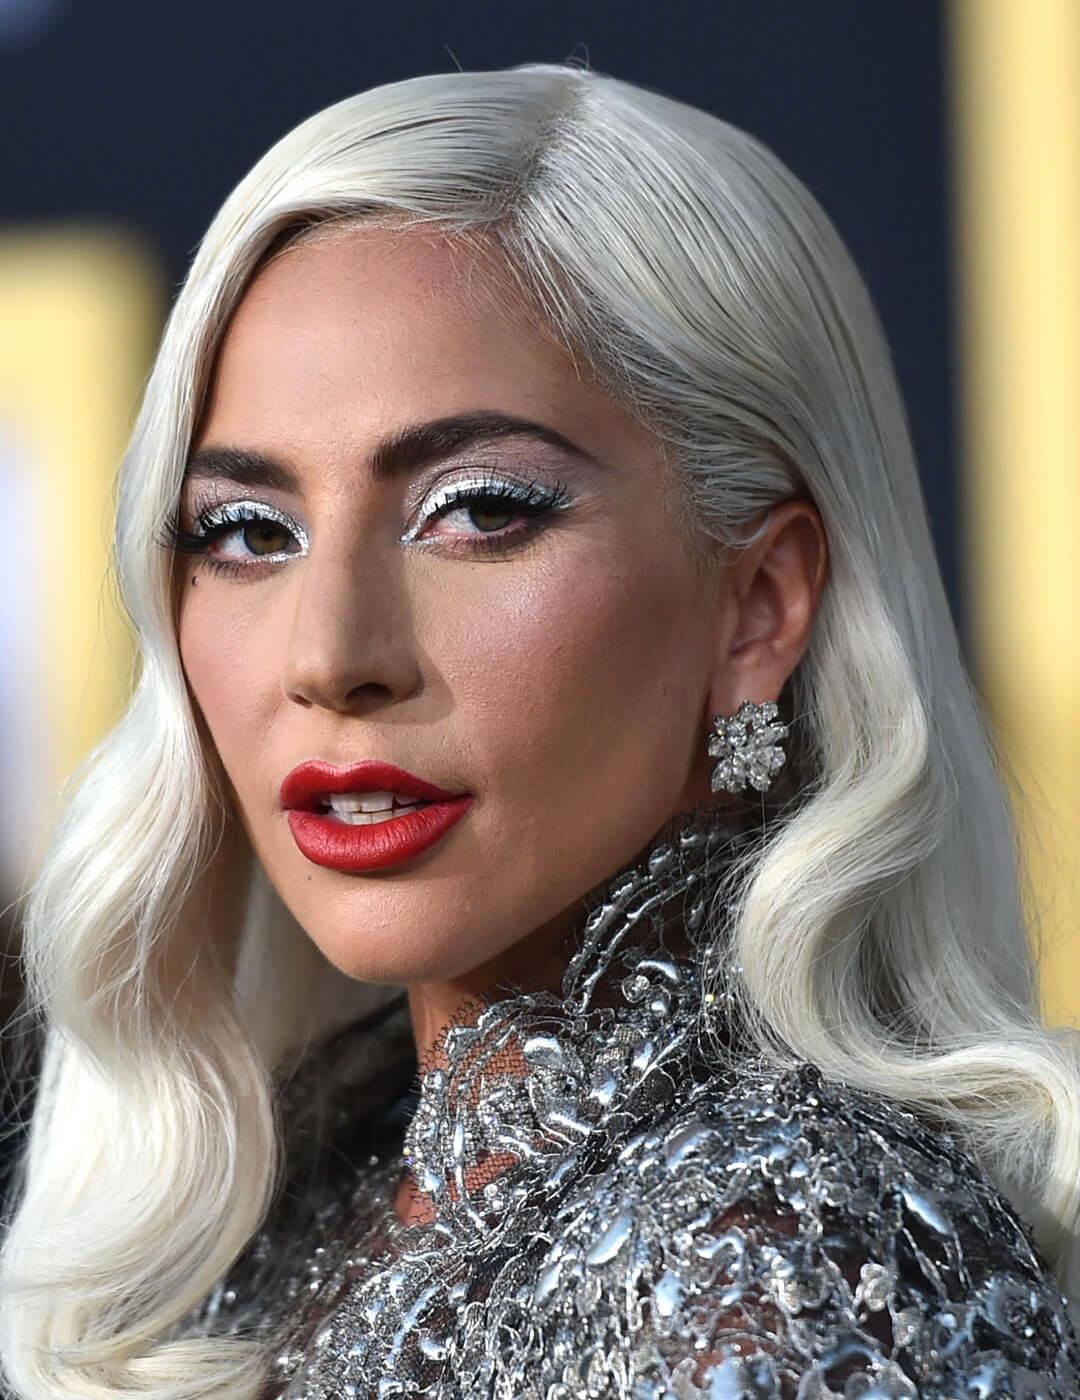 A photo of Lady Gaga with a  platinum blonde hair and silver eyeshadow, dress, and earrings